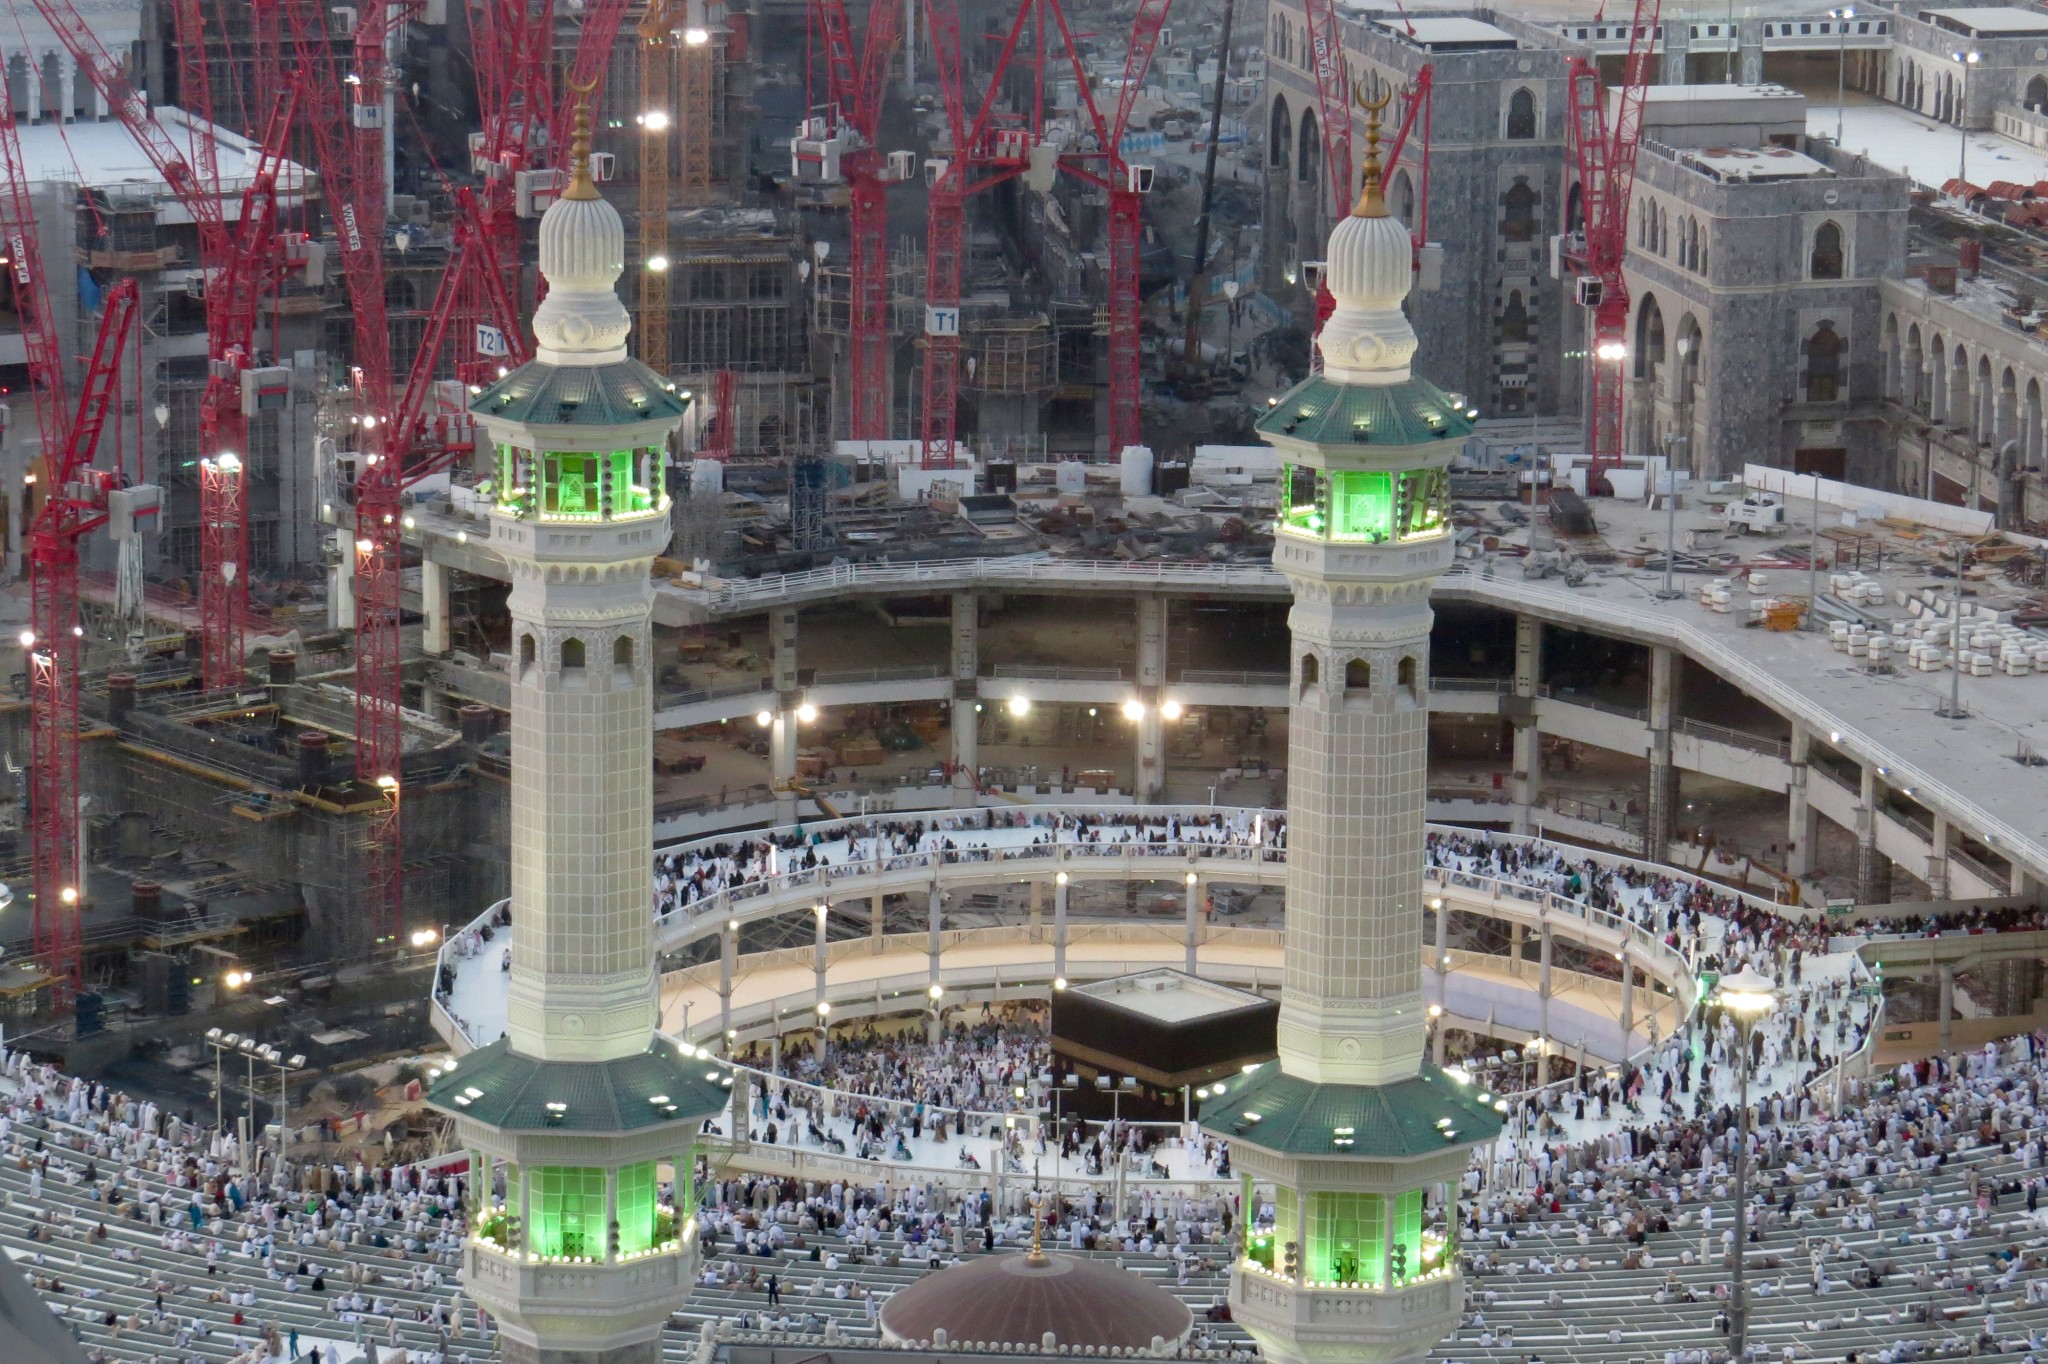 6 Things I Miss About Mecca